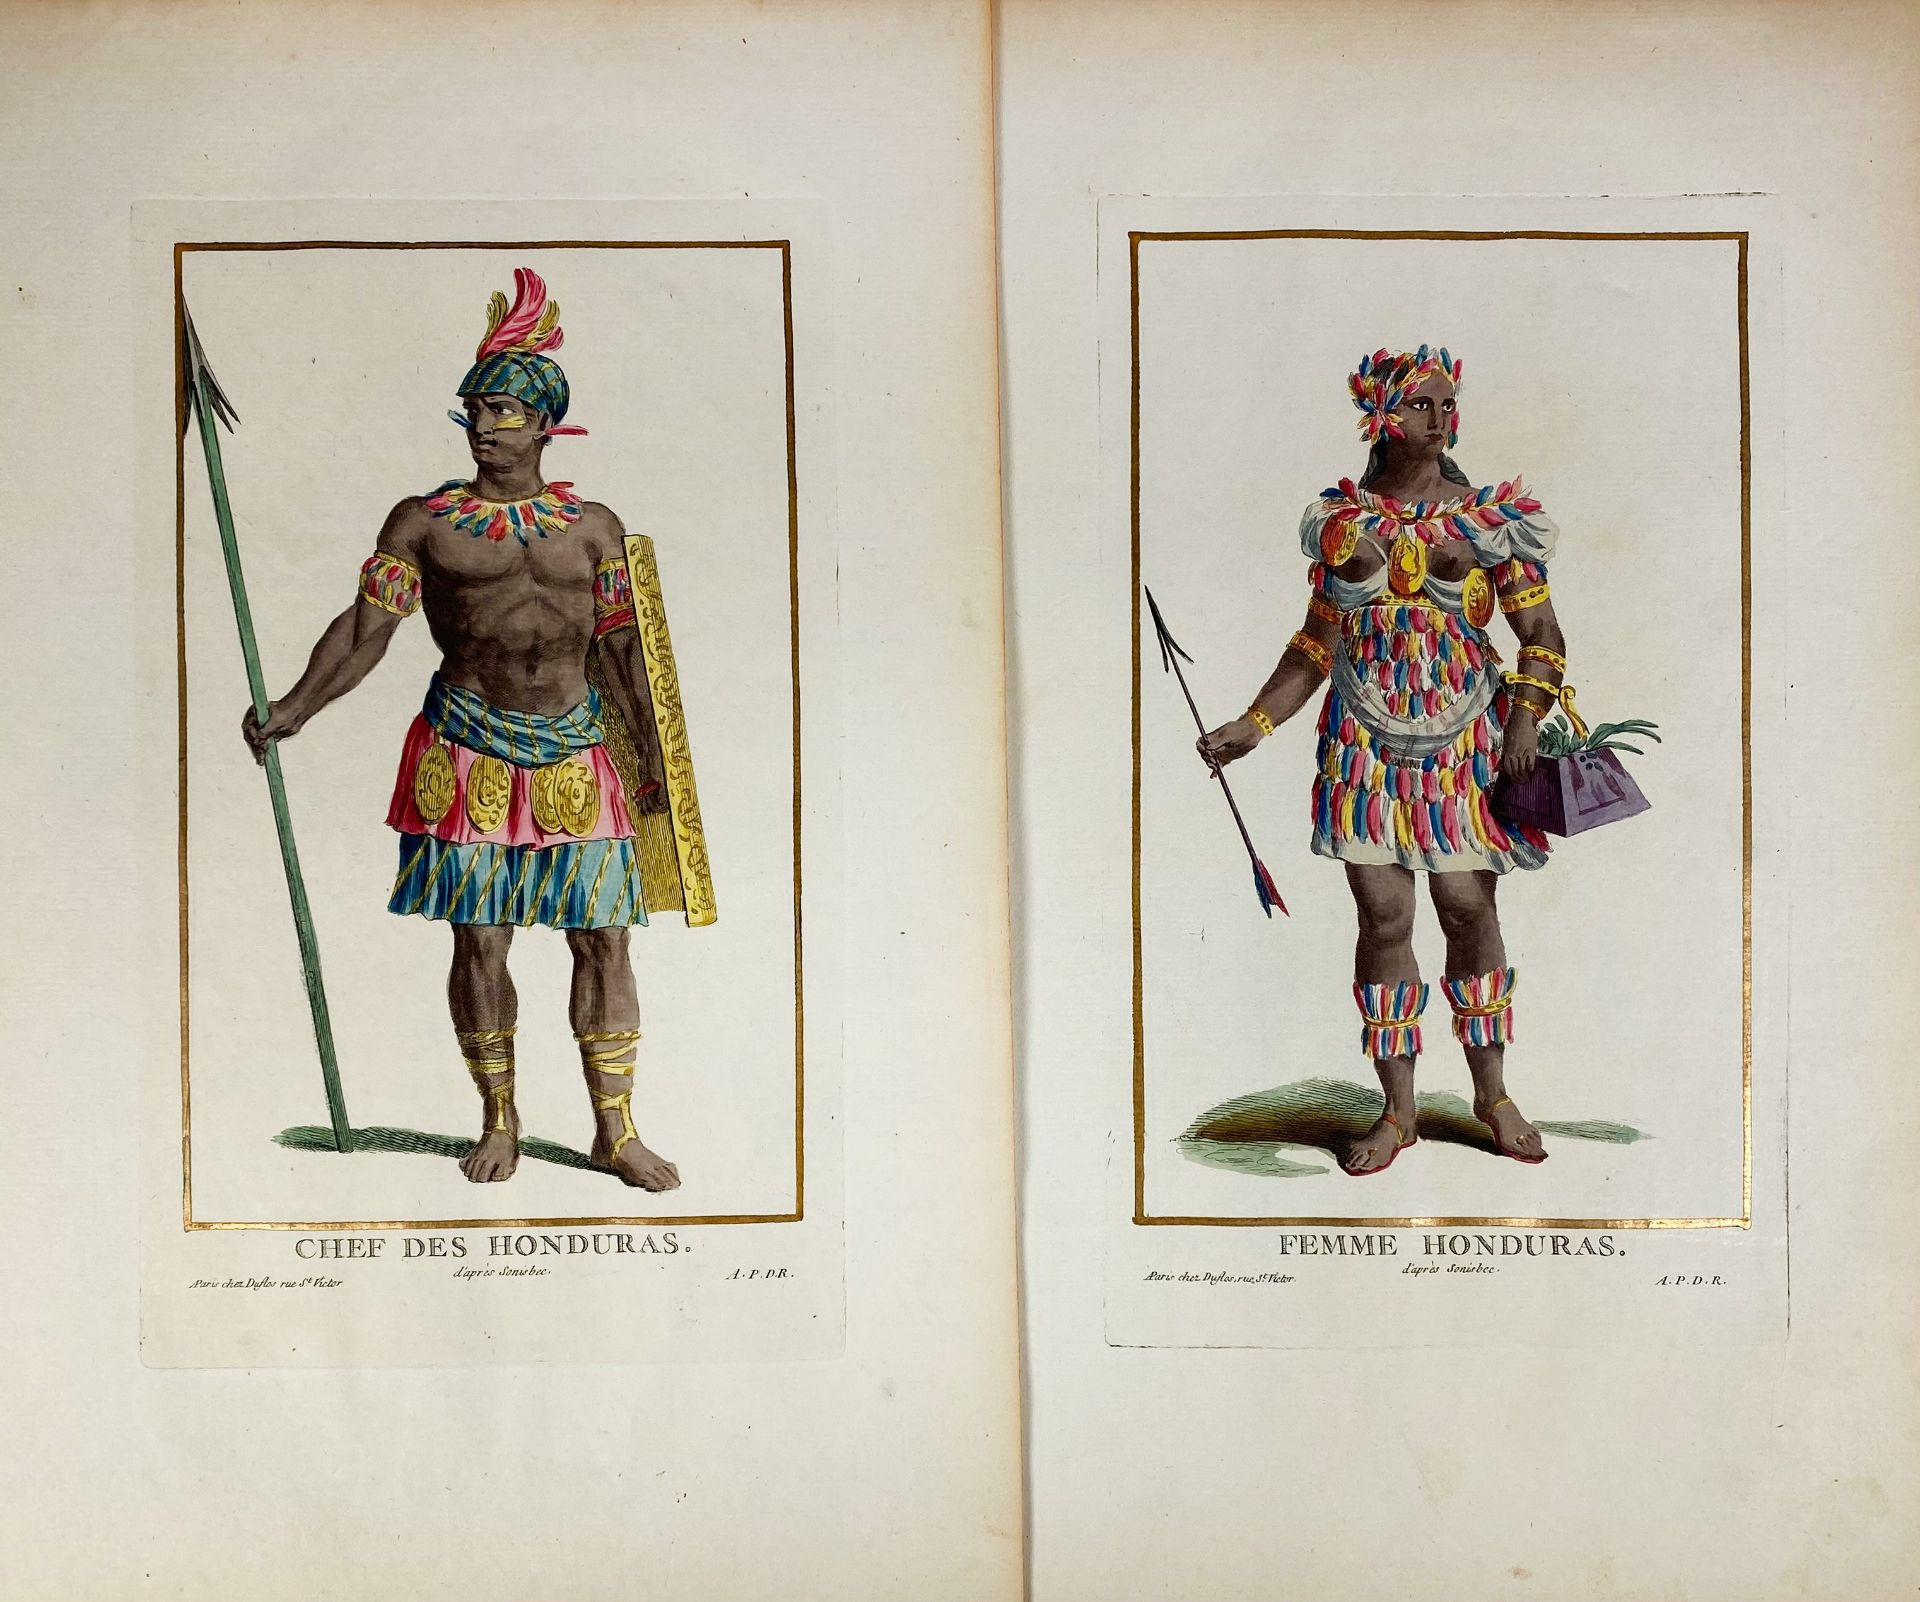 COSTUME PLATES -- SOUTH AMERICA -- COLLECTION of 37 costume plates depicting Indian tribes